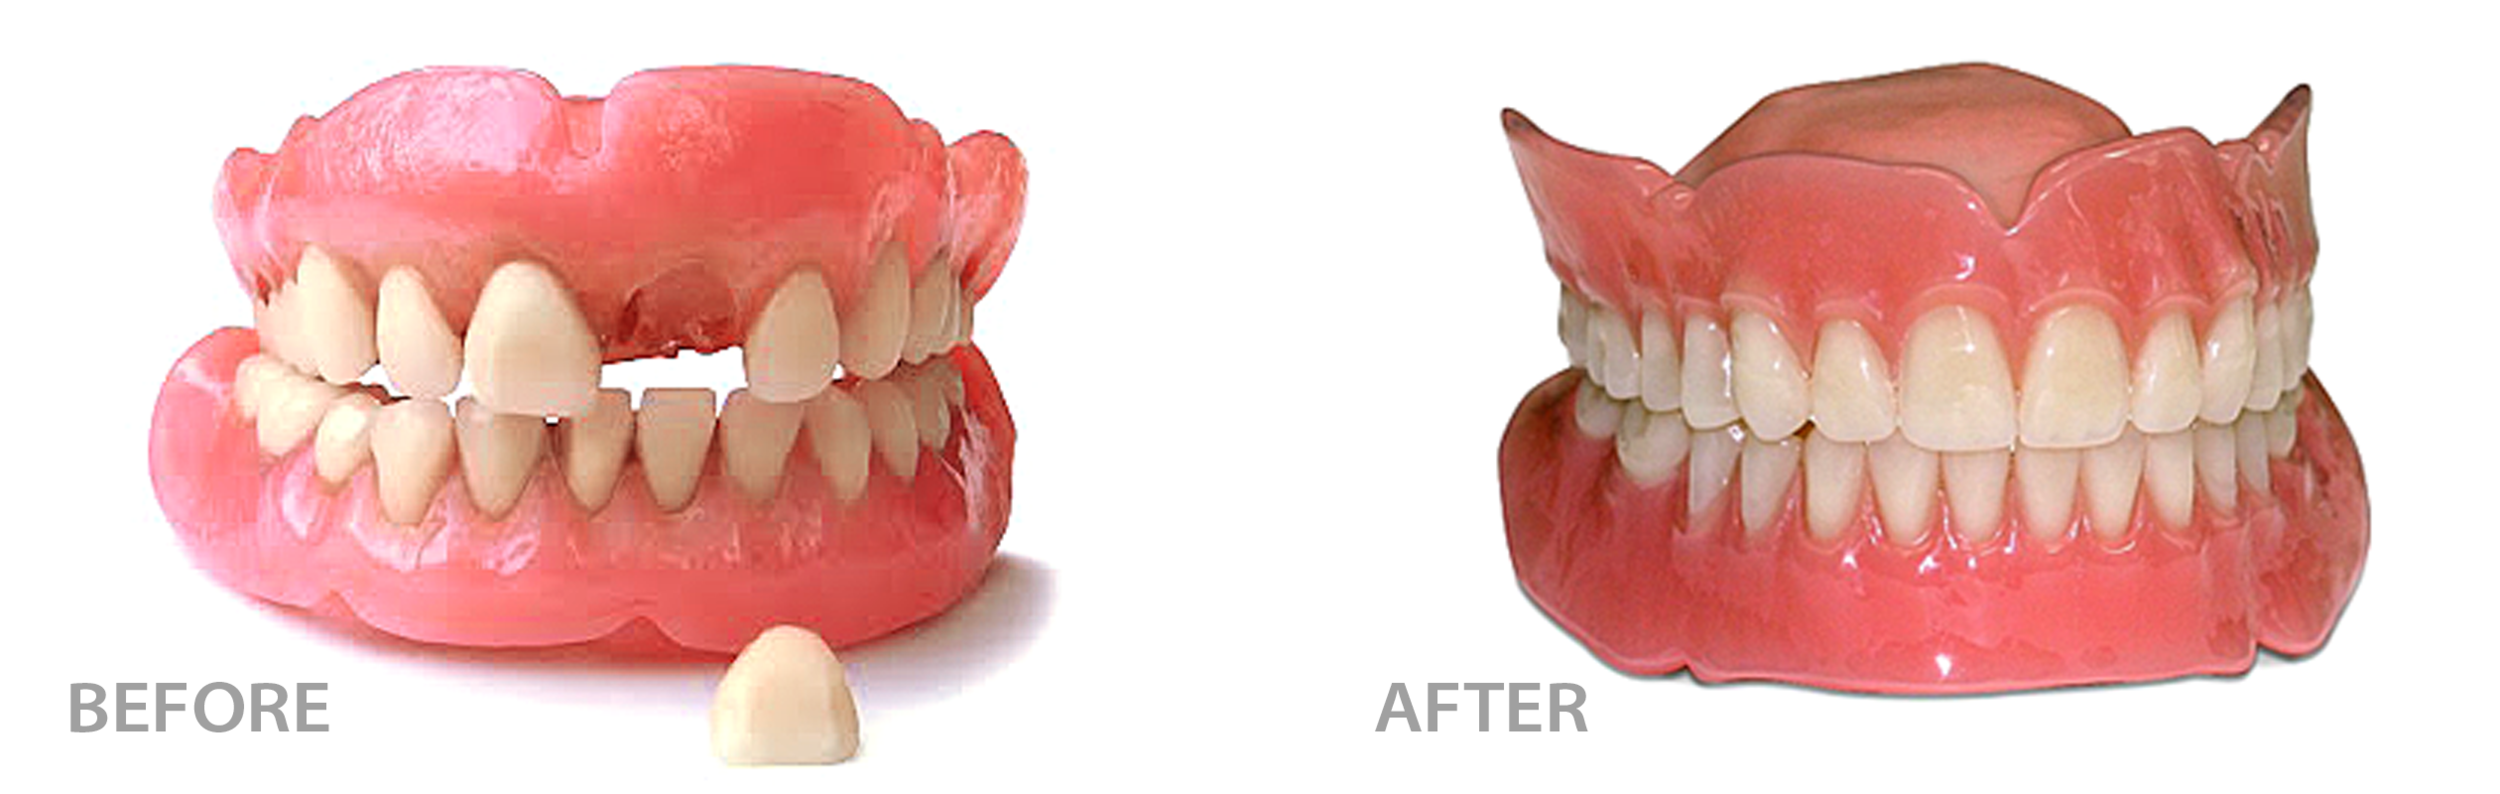  before image of denture set with tooth missing beside after image of same denture set with tooth fixed 